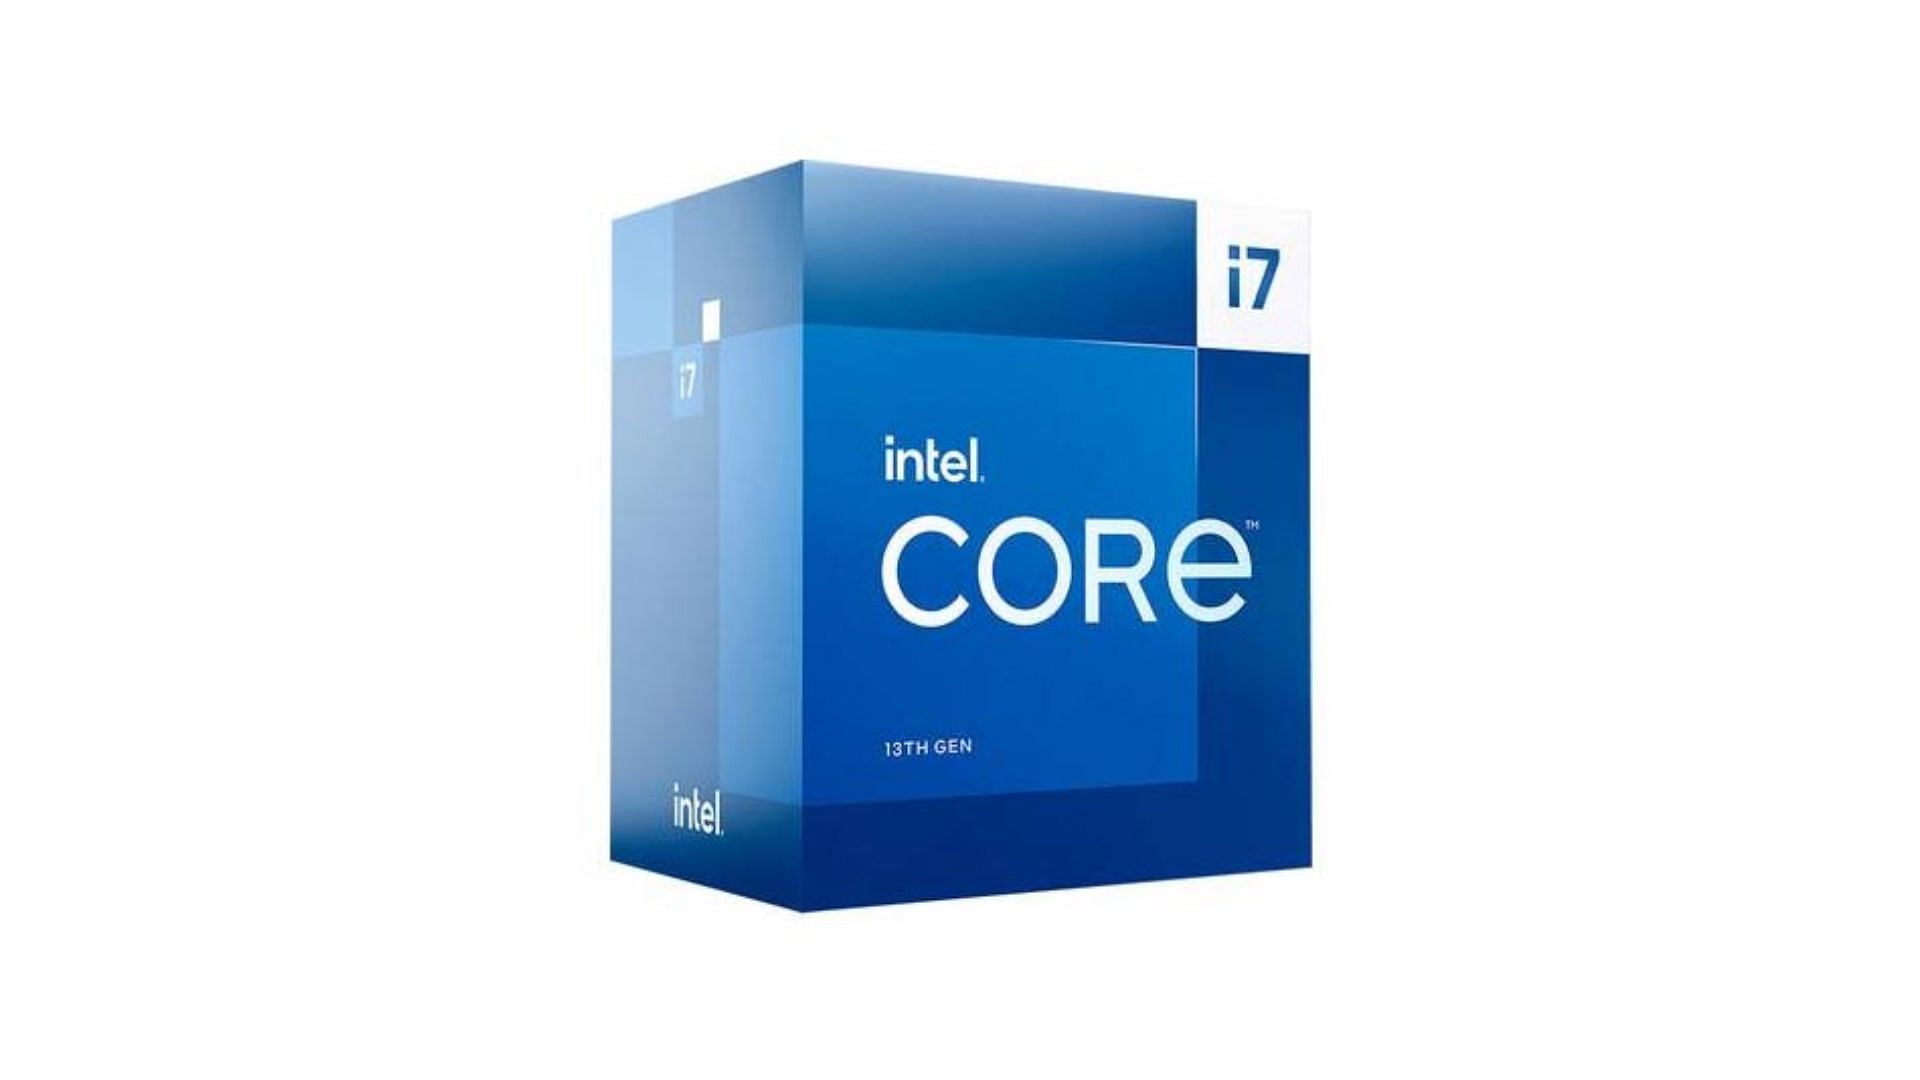 Packaging of the Intel Core i7 chips (Image via Intel)